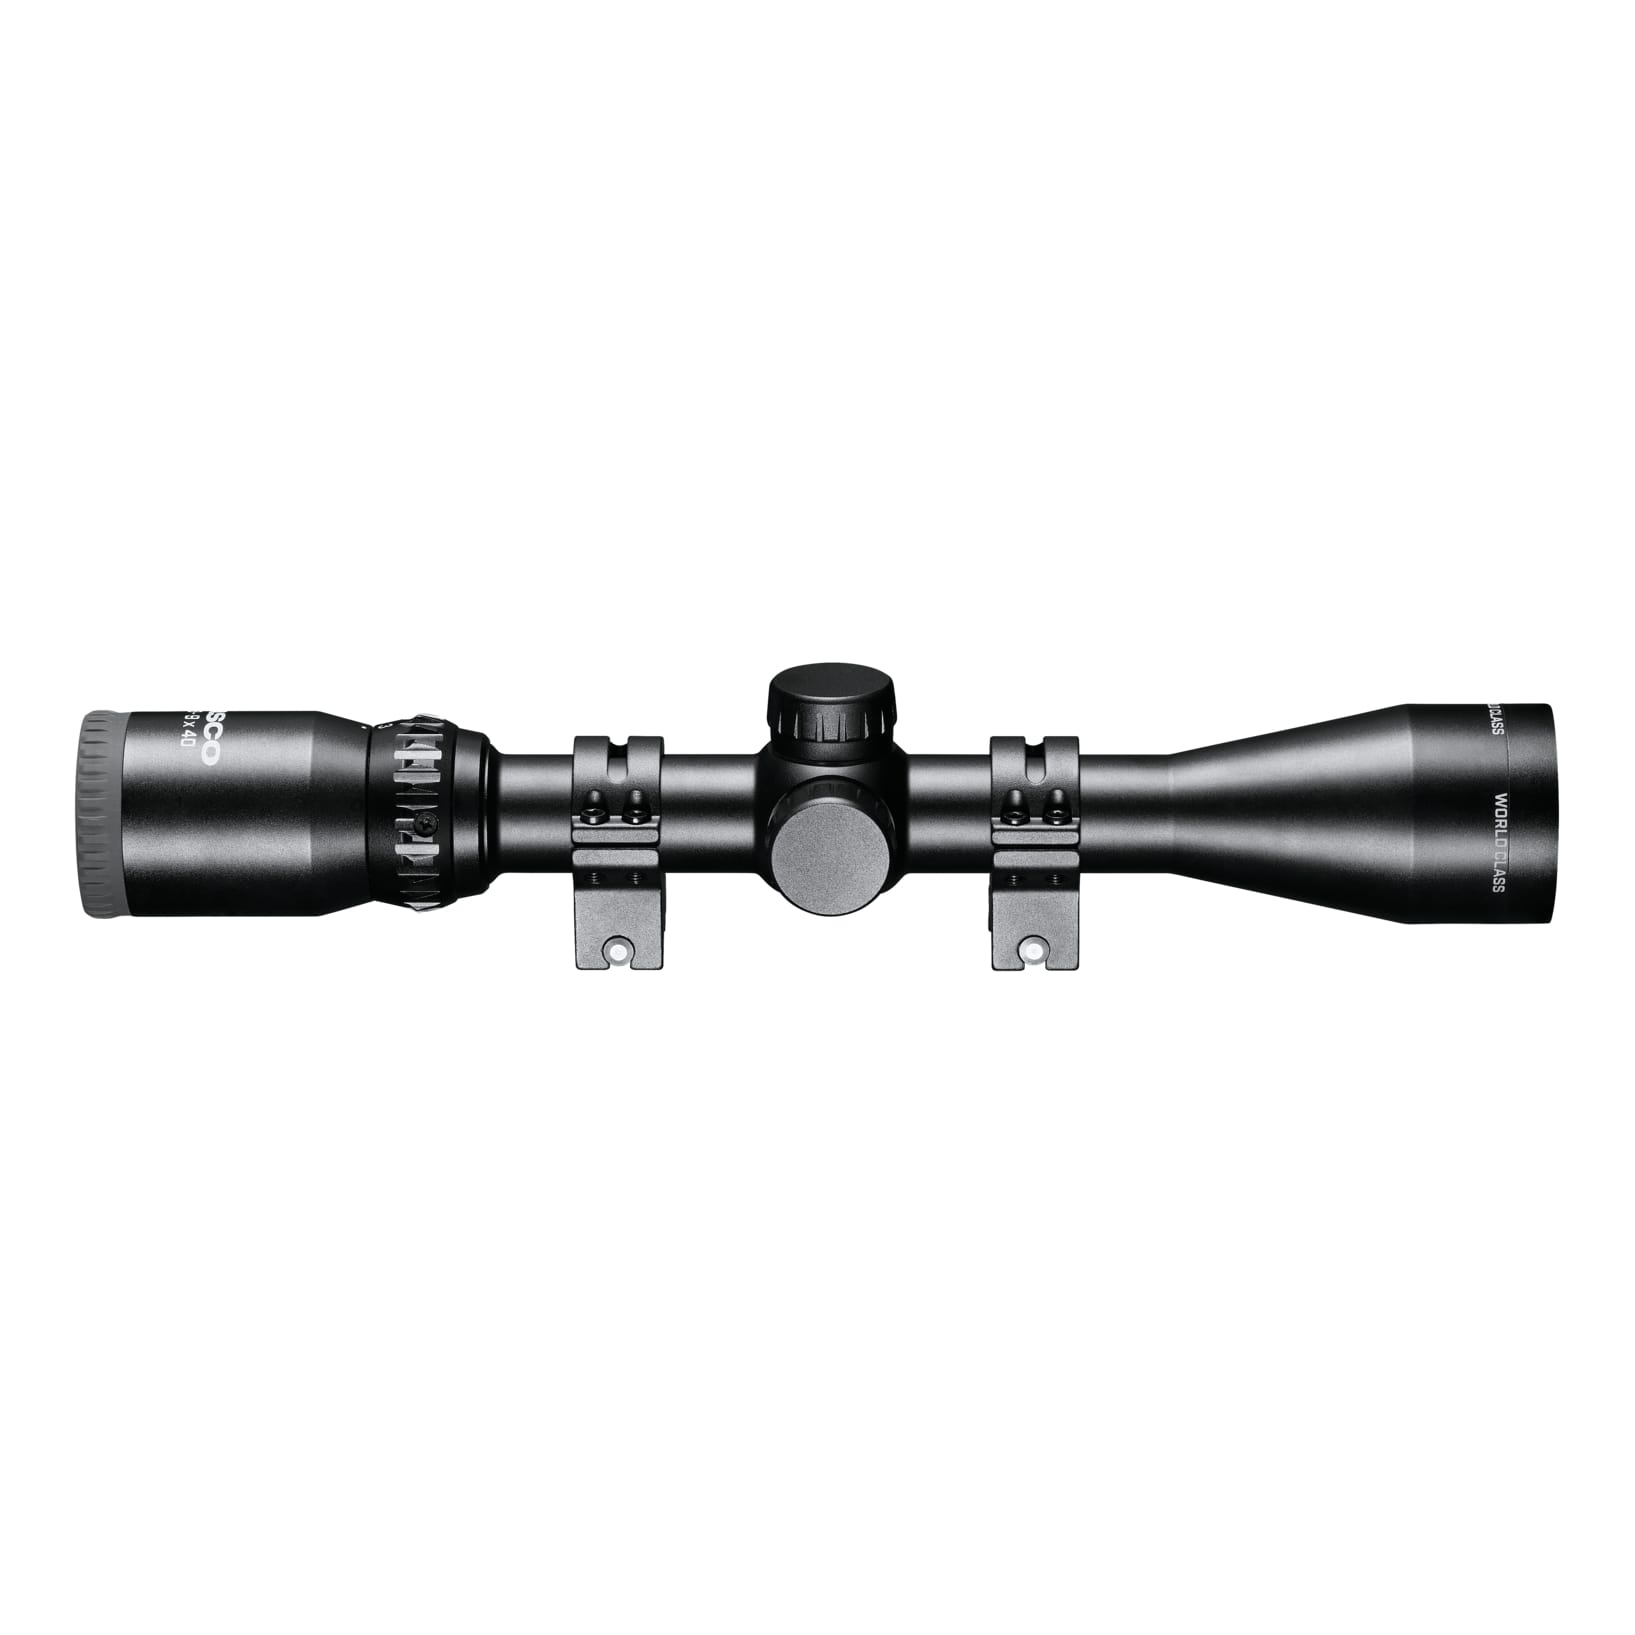 Tasco® World Class Riflescopes with Rings - 3-9x40mm